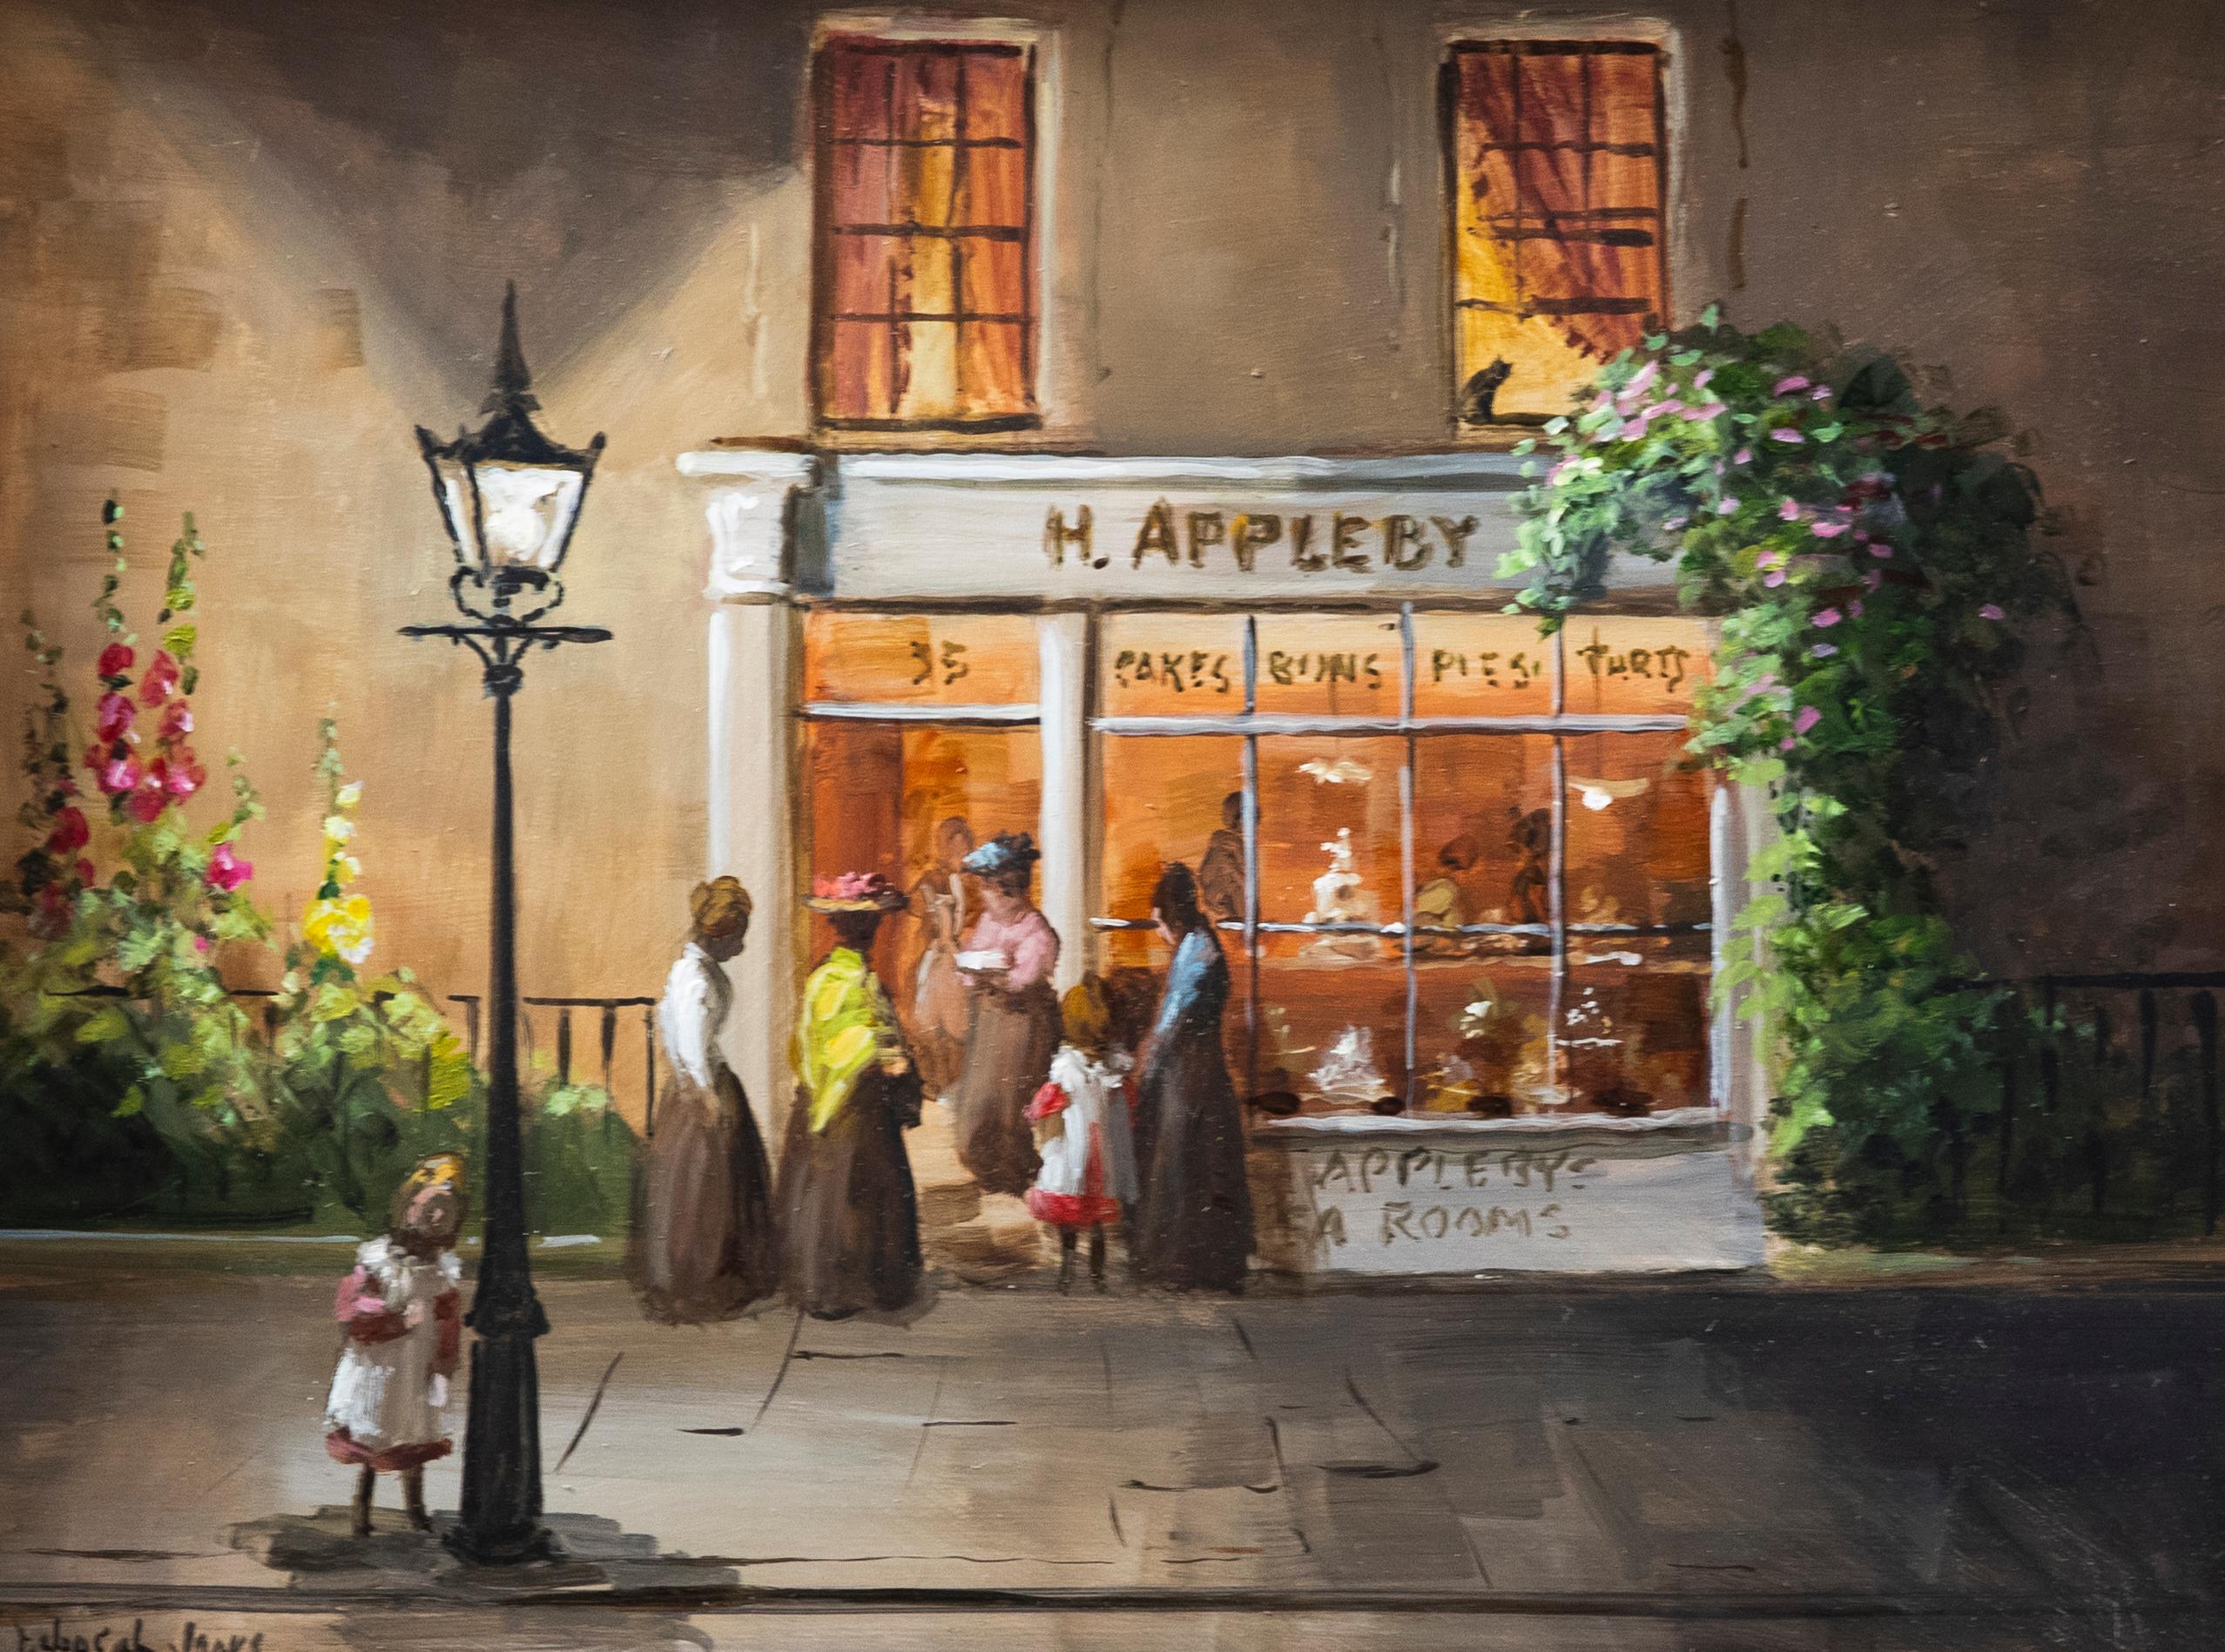 A charming 20th century street scene in oil, depicting the frontage of an Edwardian tea rooms with magnificent window display. Figures can be seen queuing at the door for a reservation. The painting has been well-presented in an elegant gilt-effect